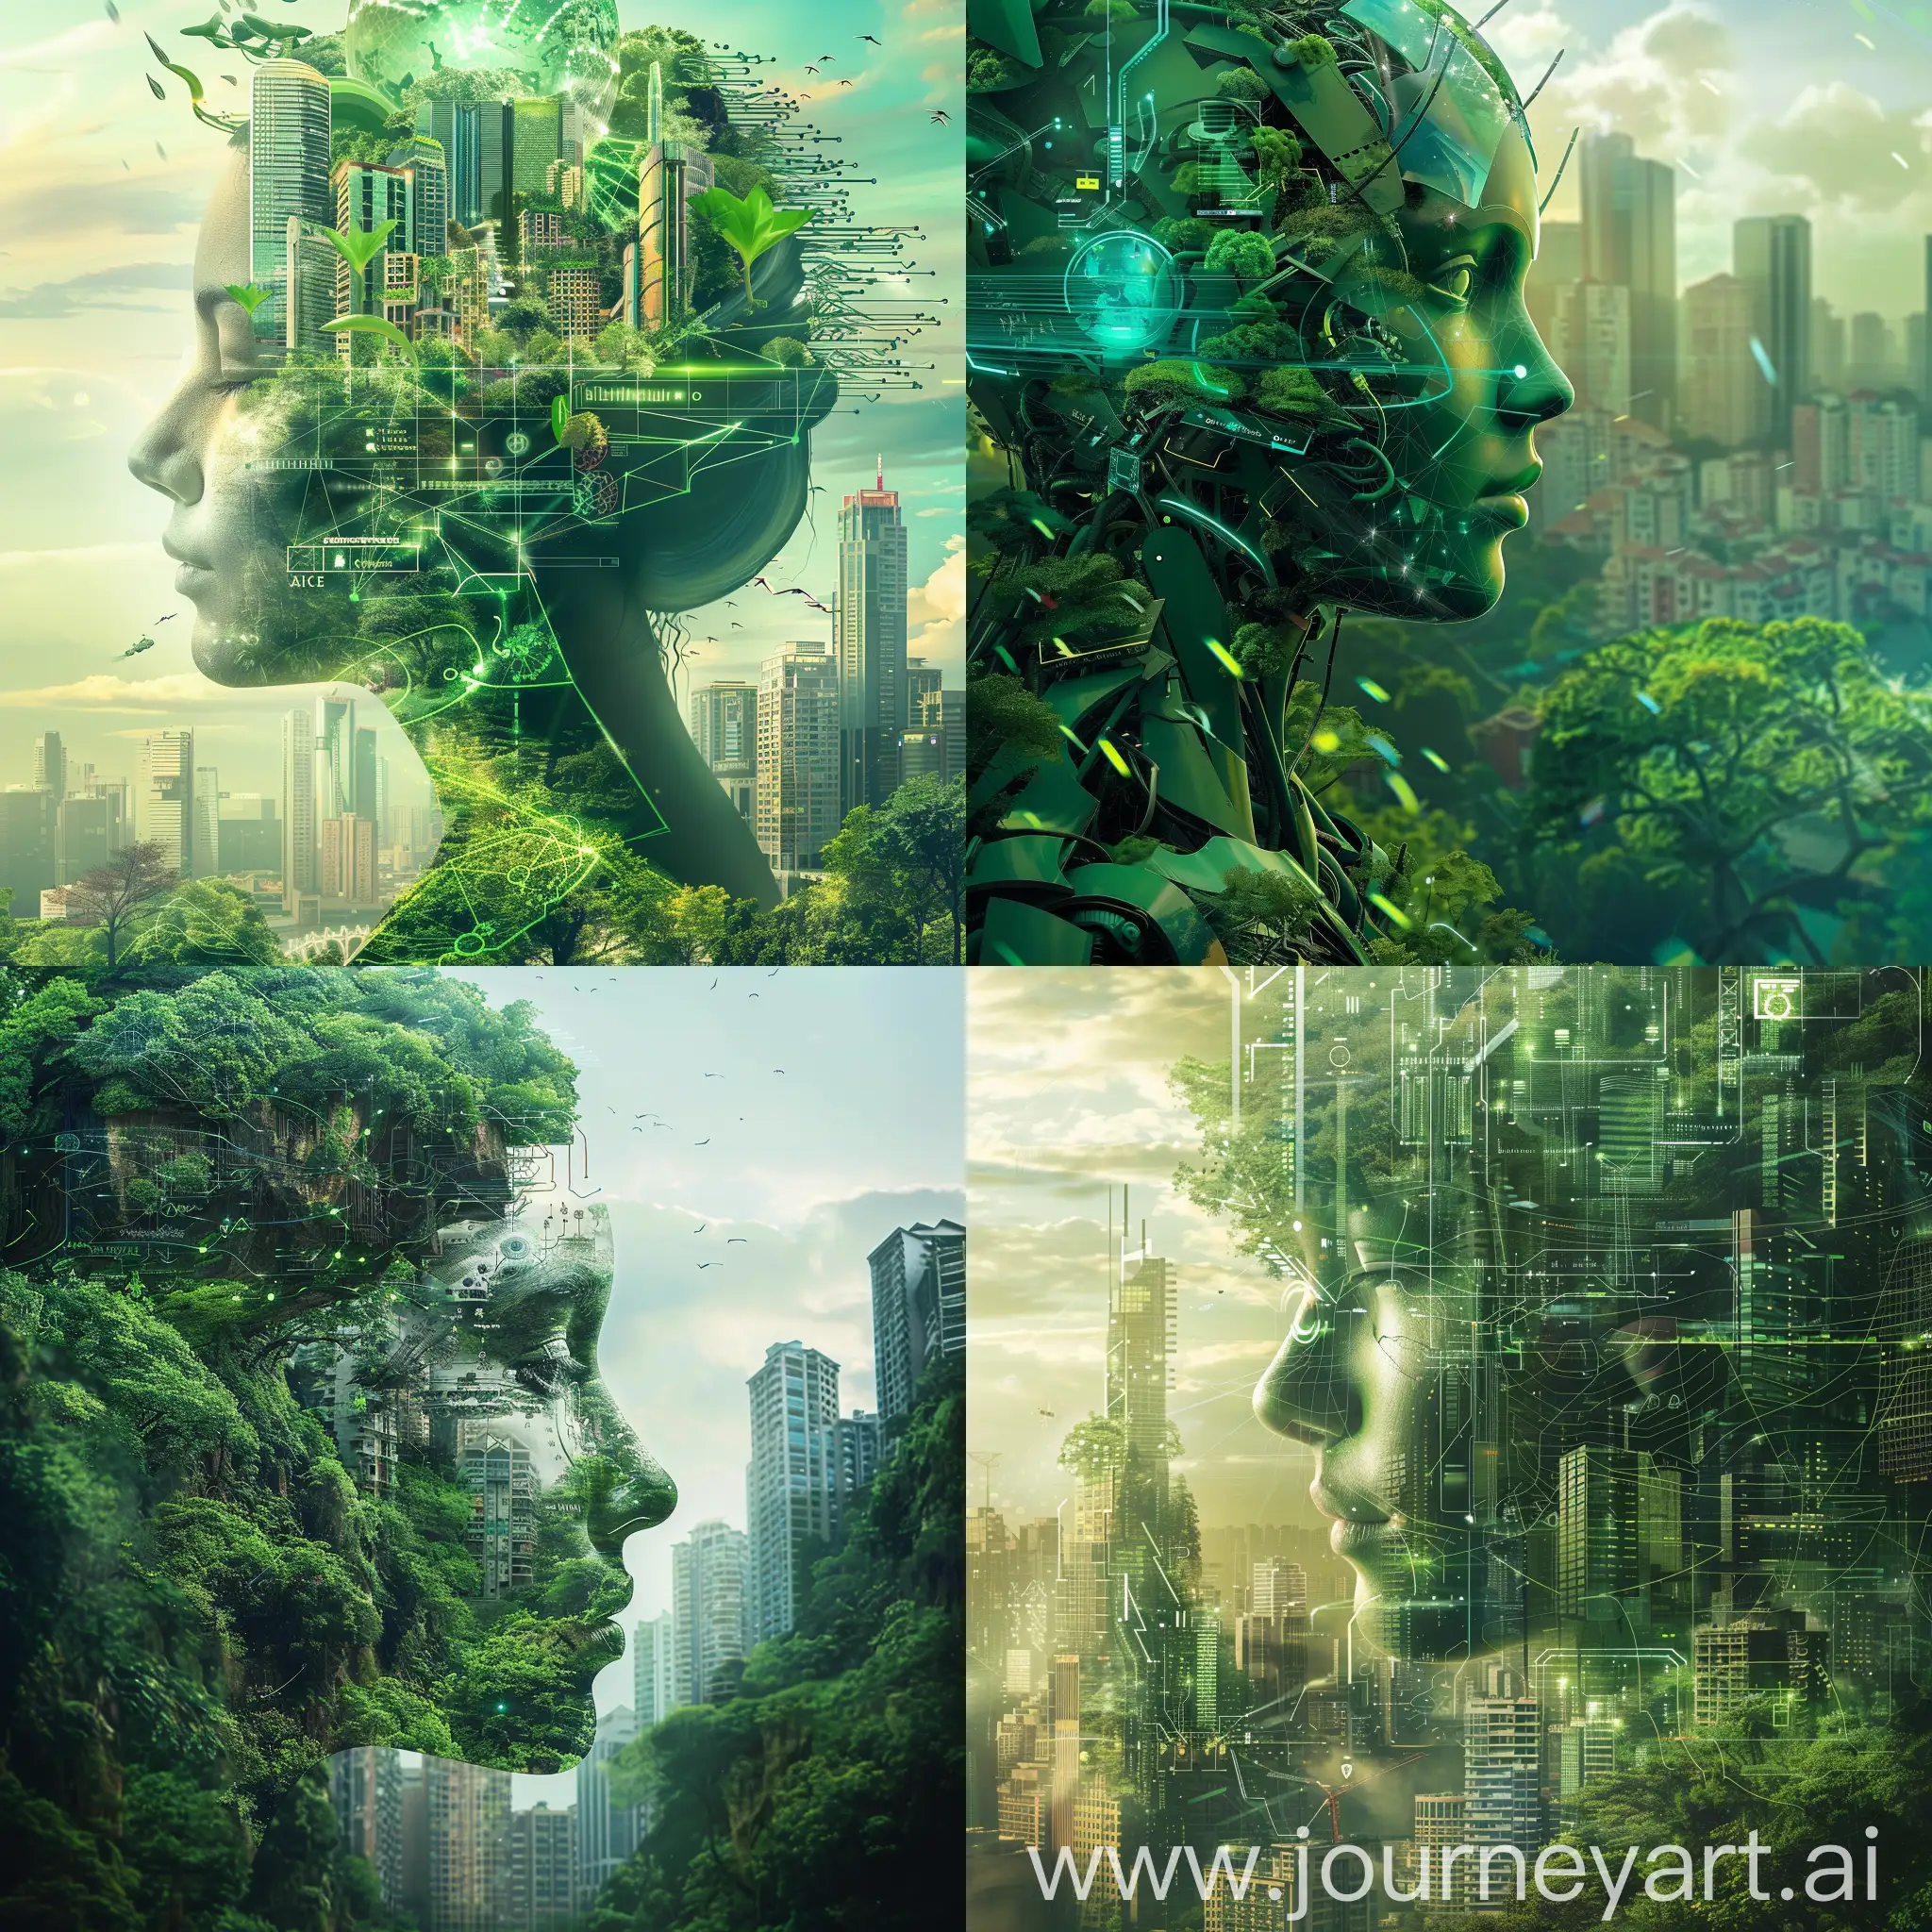 Please think of an image that can effectively communicate the message of green technology and the importance of artificial intelligence in protecting the environment. The image should be visually appealing and have a modern aesthetic style. Keep in mind that the image with dimensions of 1 meter by 8 meters, so the design should not lose its perfection when it is placed either vertically or horizontally. Please prioritize the use of green technology and a simple yet aesthetically pleasing design that can convey the beauty of the future and the power of AI to protect the environment.